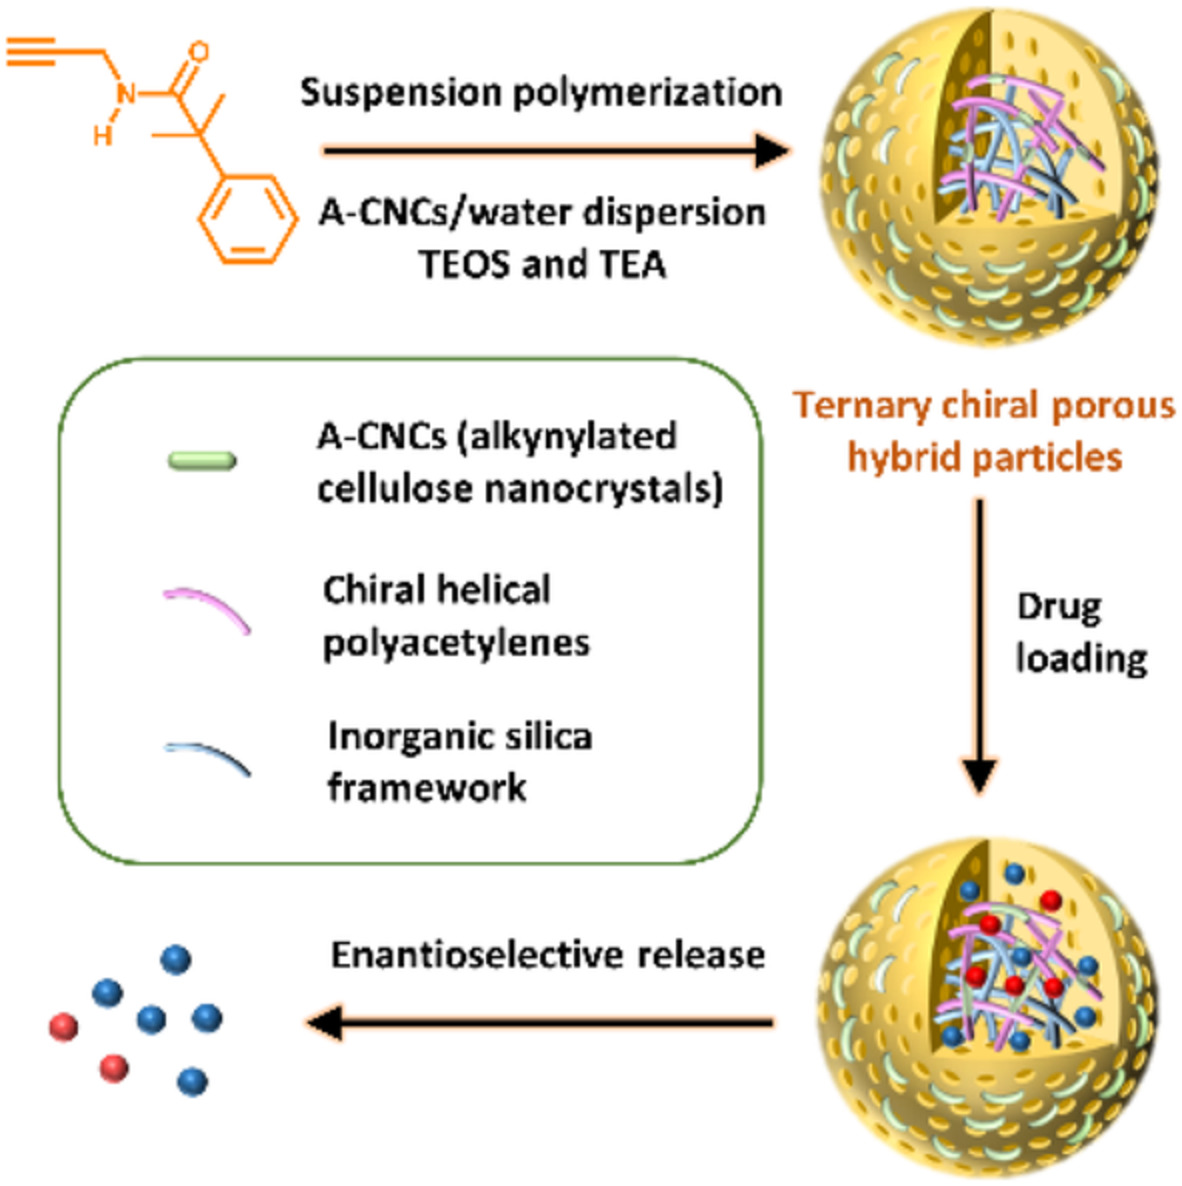 Optically active porous hybrid particles constructed by alkynylated cellulose nanocrystals, helical substituted polyacetylene, and inorganic silica for enantio‐differentiating towards naproxen